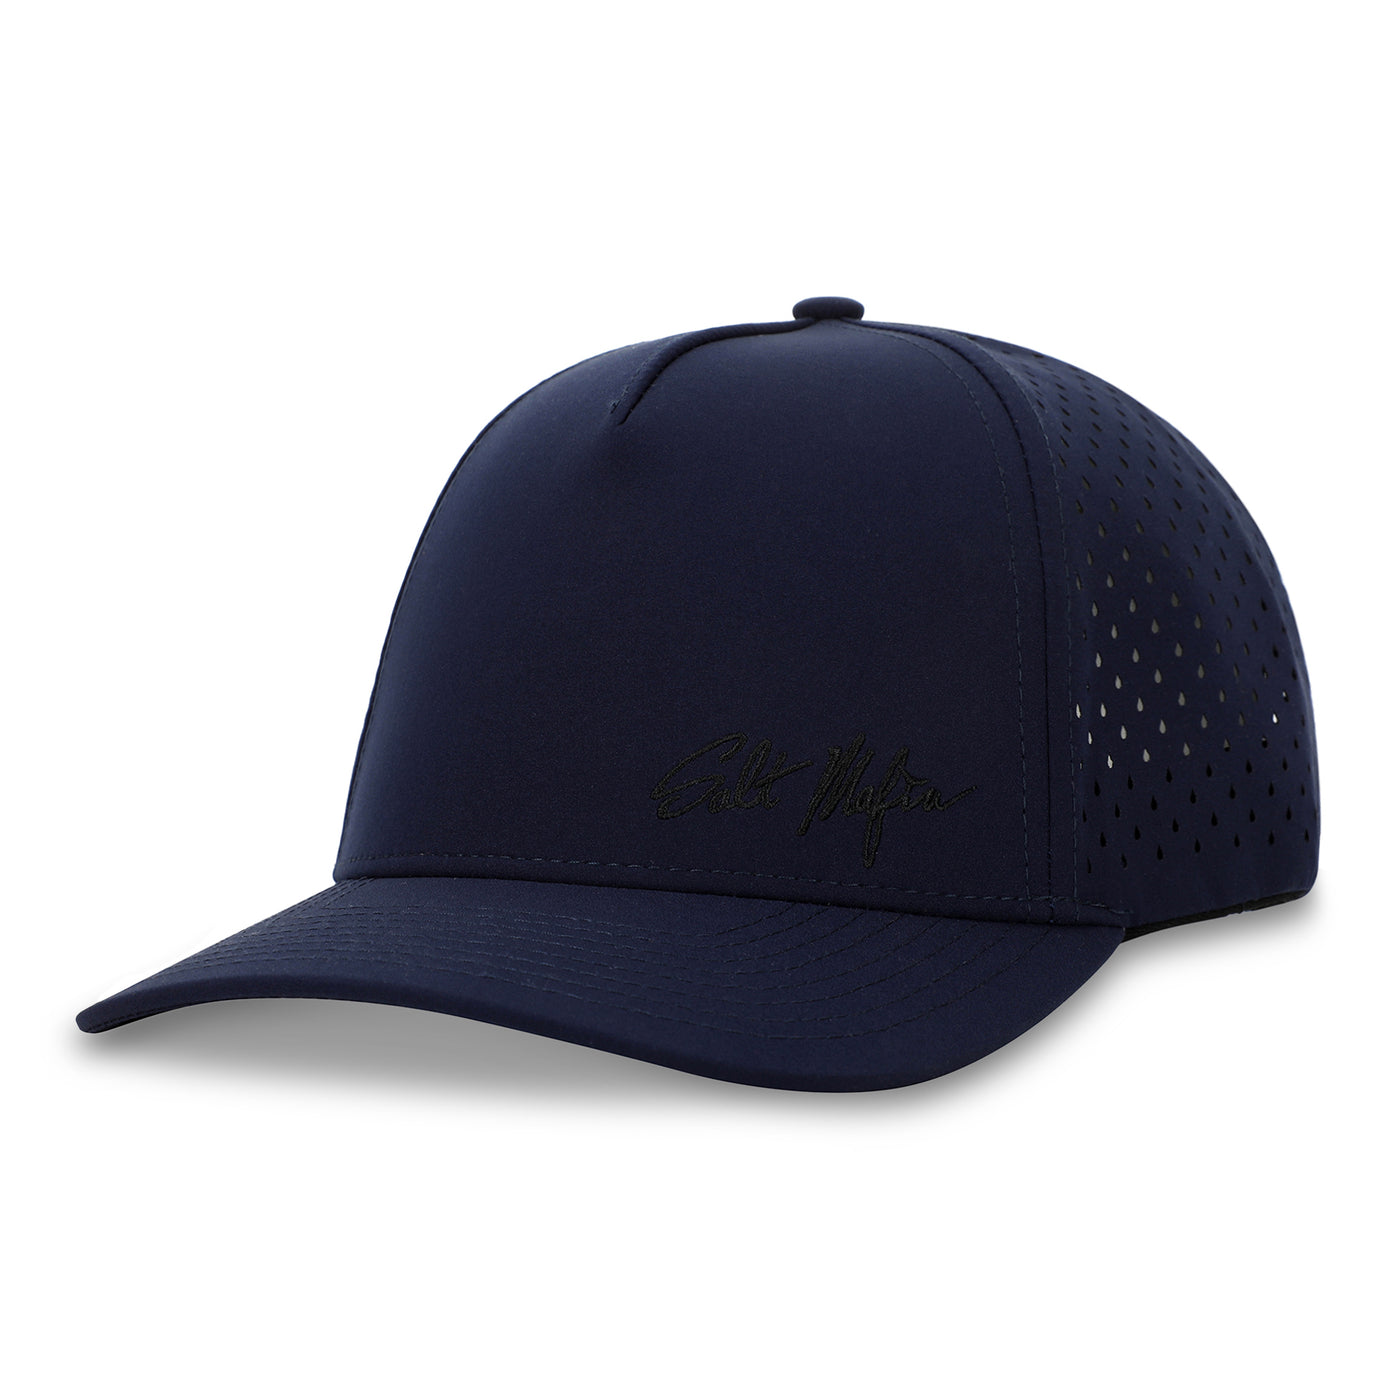 THE NAVY (curved)